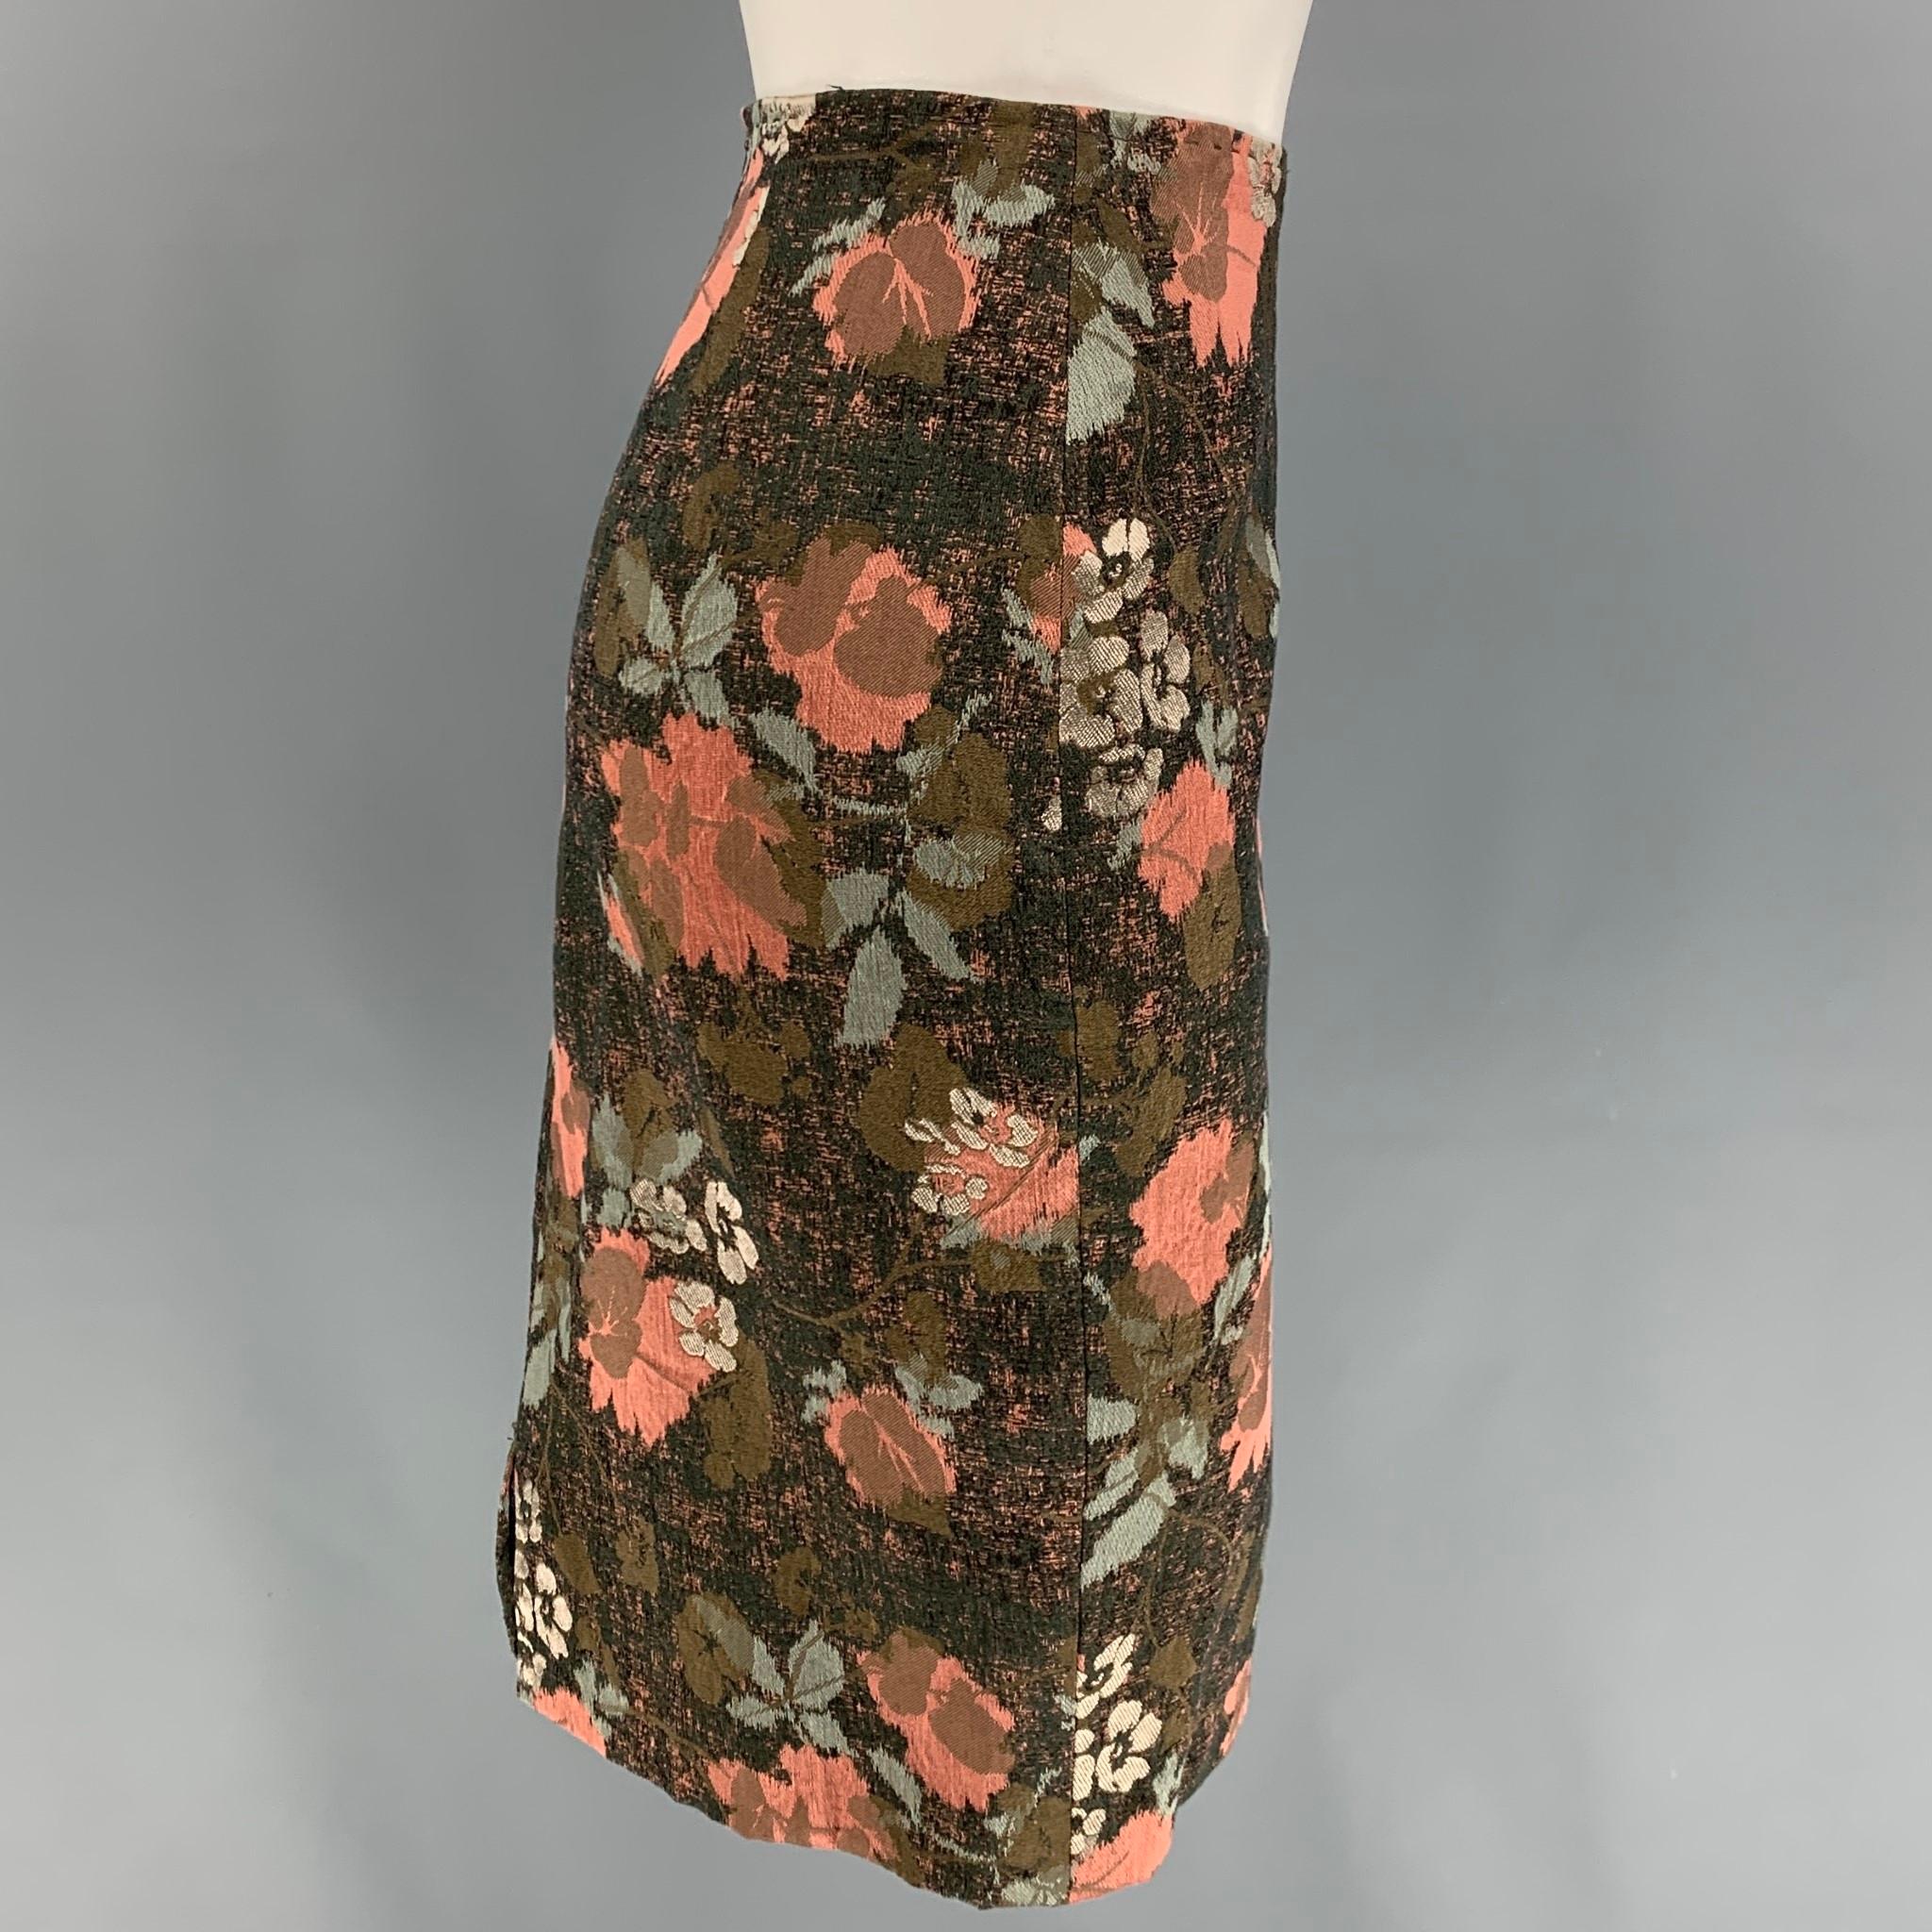 DRIES VAN NOTEN skirt comes in multi-color woven floral cotton blend with a slip liner featuring a pencil style and a back zip up closure. 

Very Good Pre-Owned Condition.
Marked: 38

Measurements:

Waist: 28 in.
Hip: 35 in.
Length: 21.5 in. 